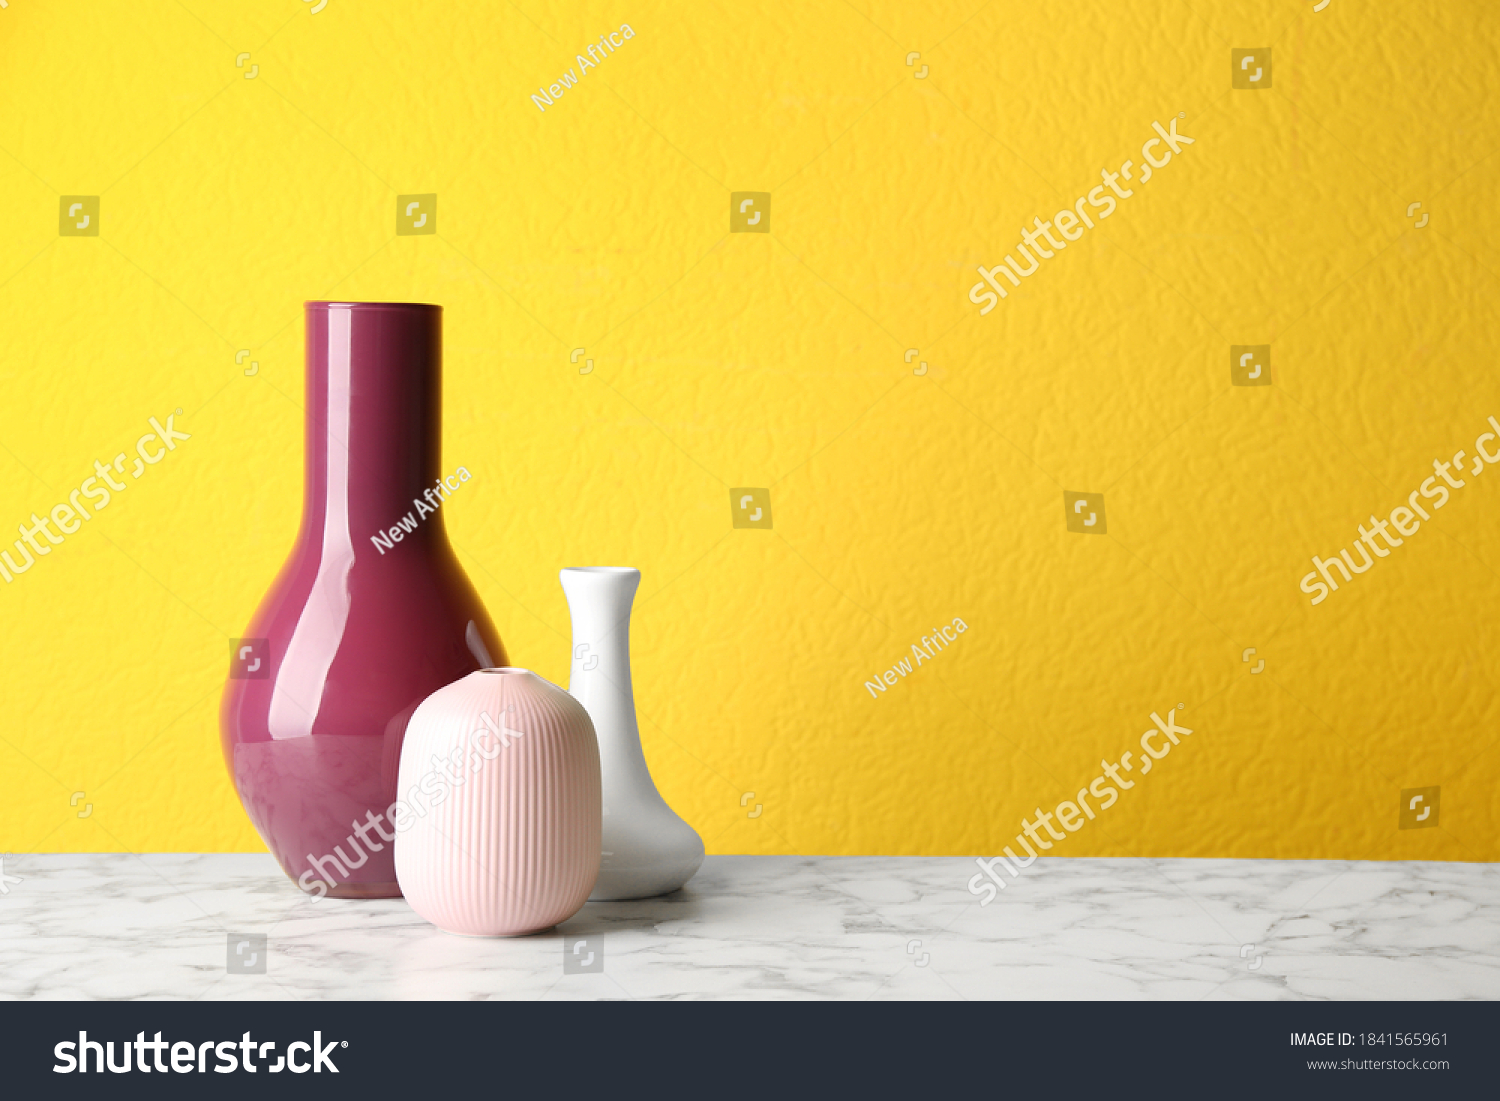 Stylish ceramic vases on white marble table against yellow background. Space for text #1841565961